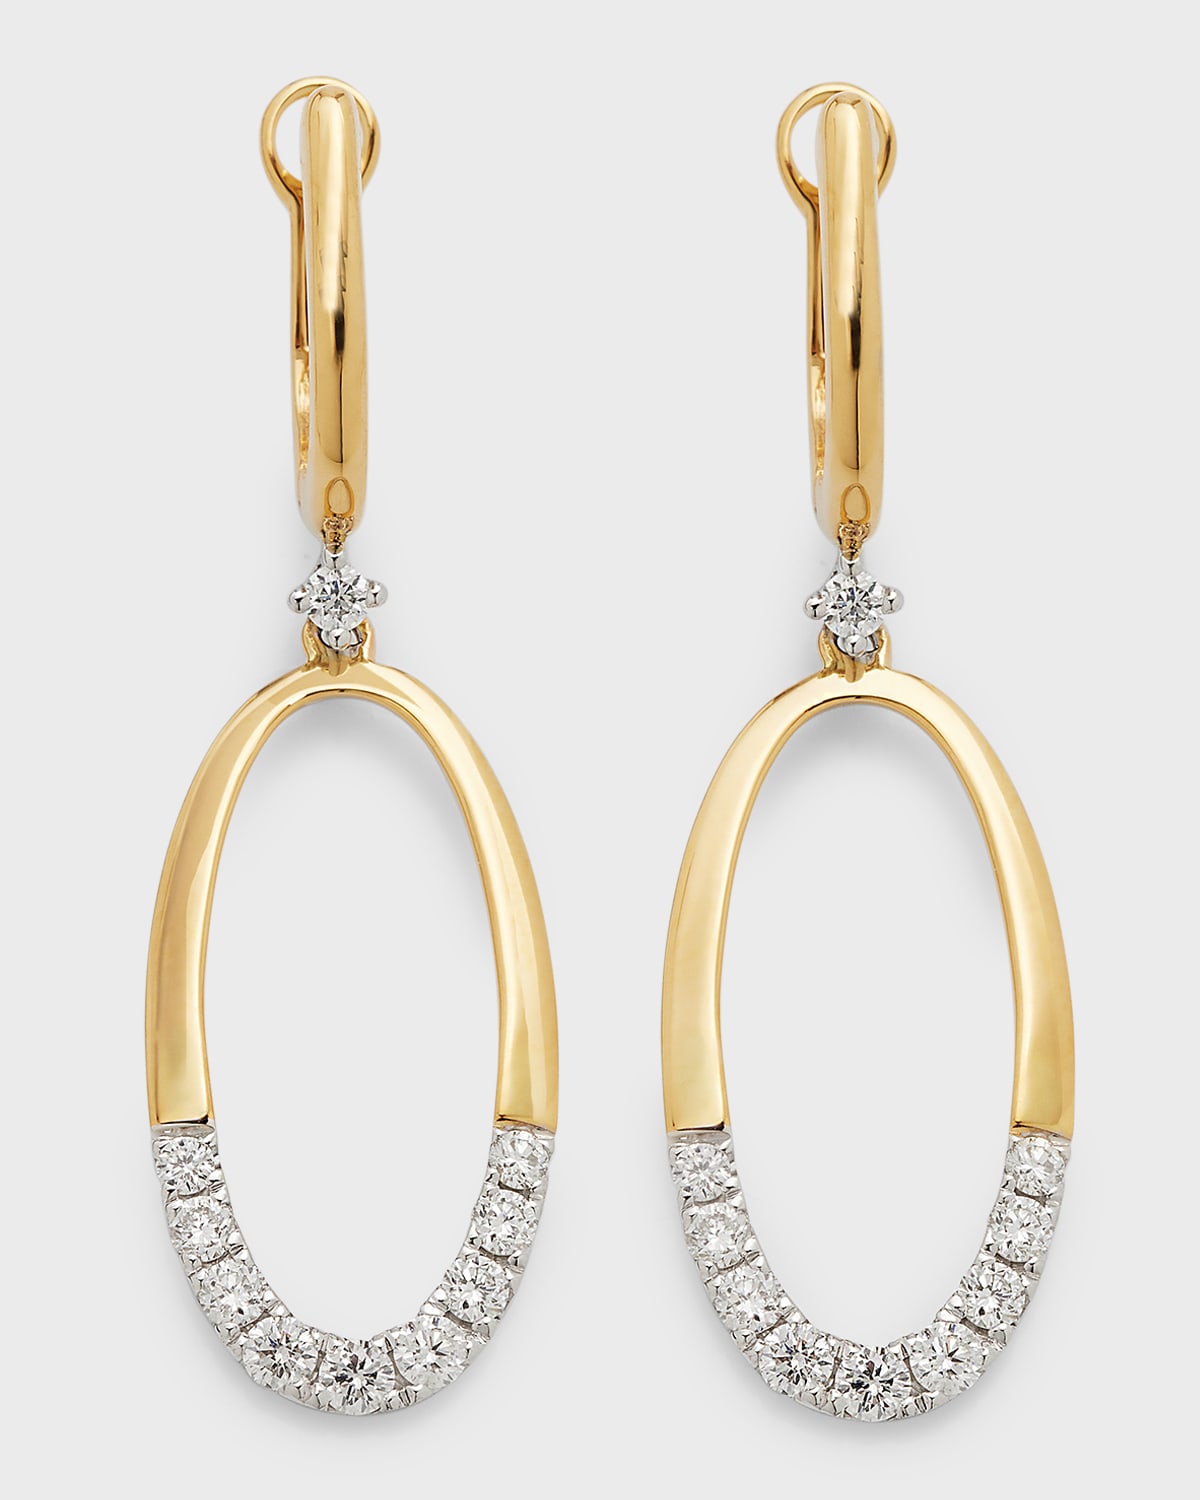 Frederic Sage 18K Yellow and White Gold Open Oval-Shape Diamond Earrings